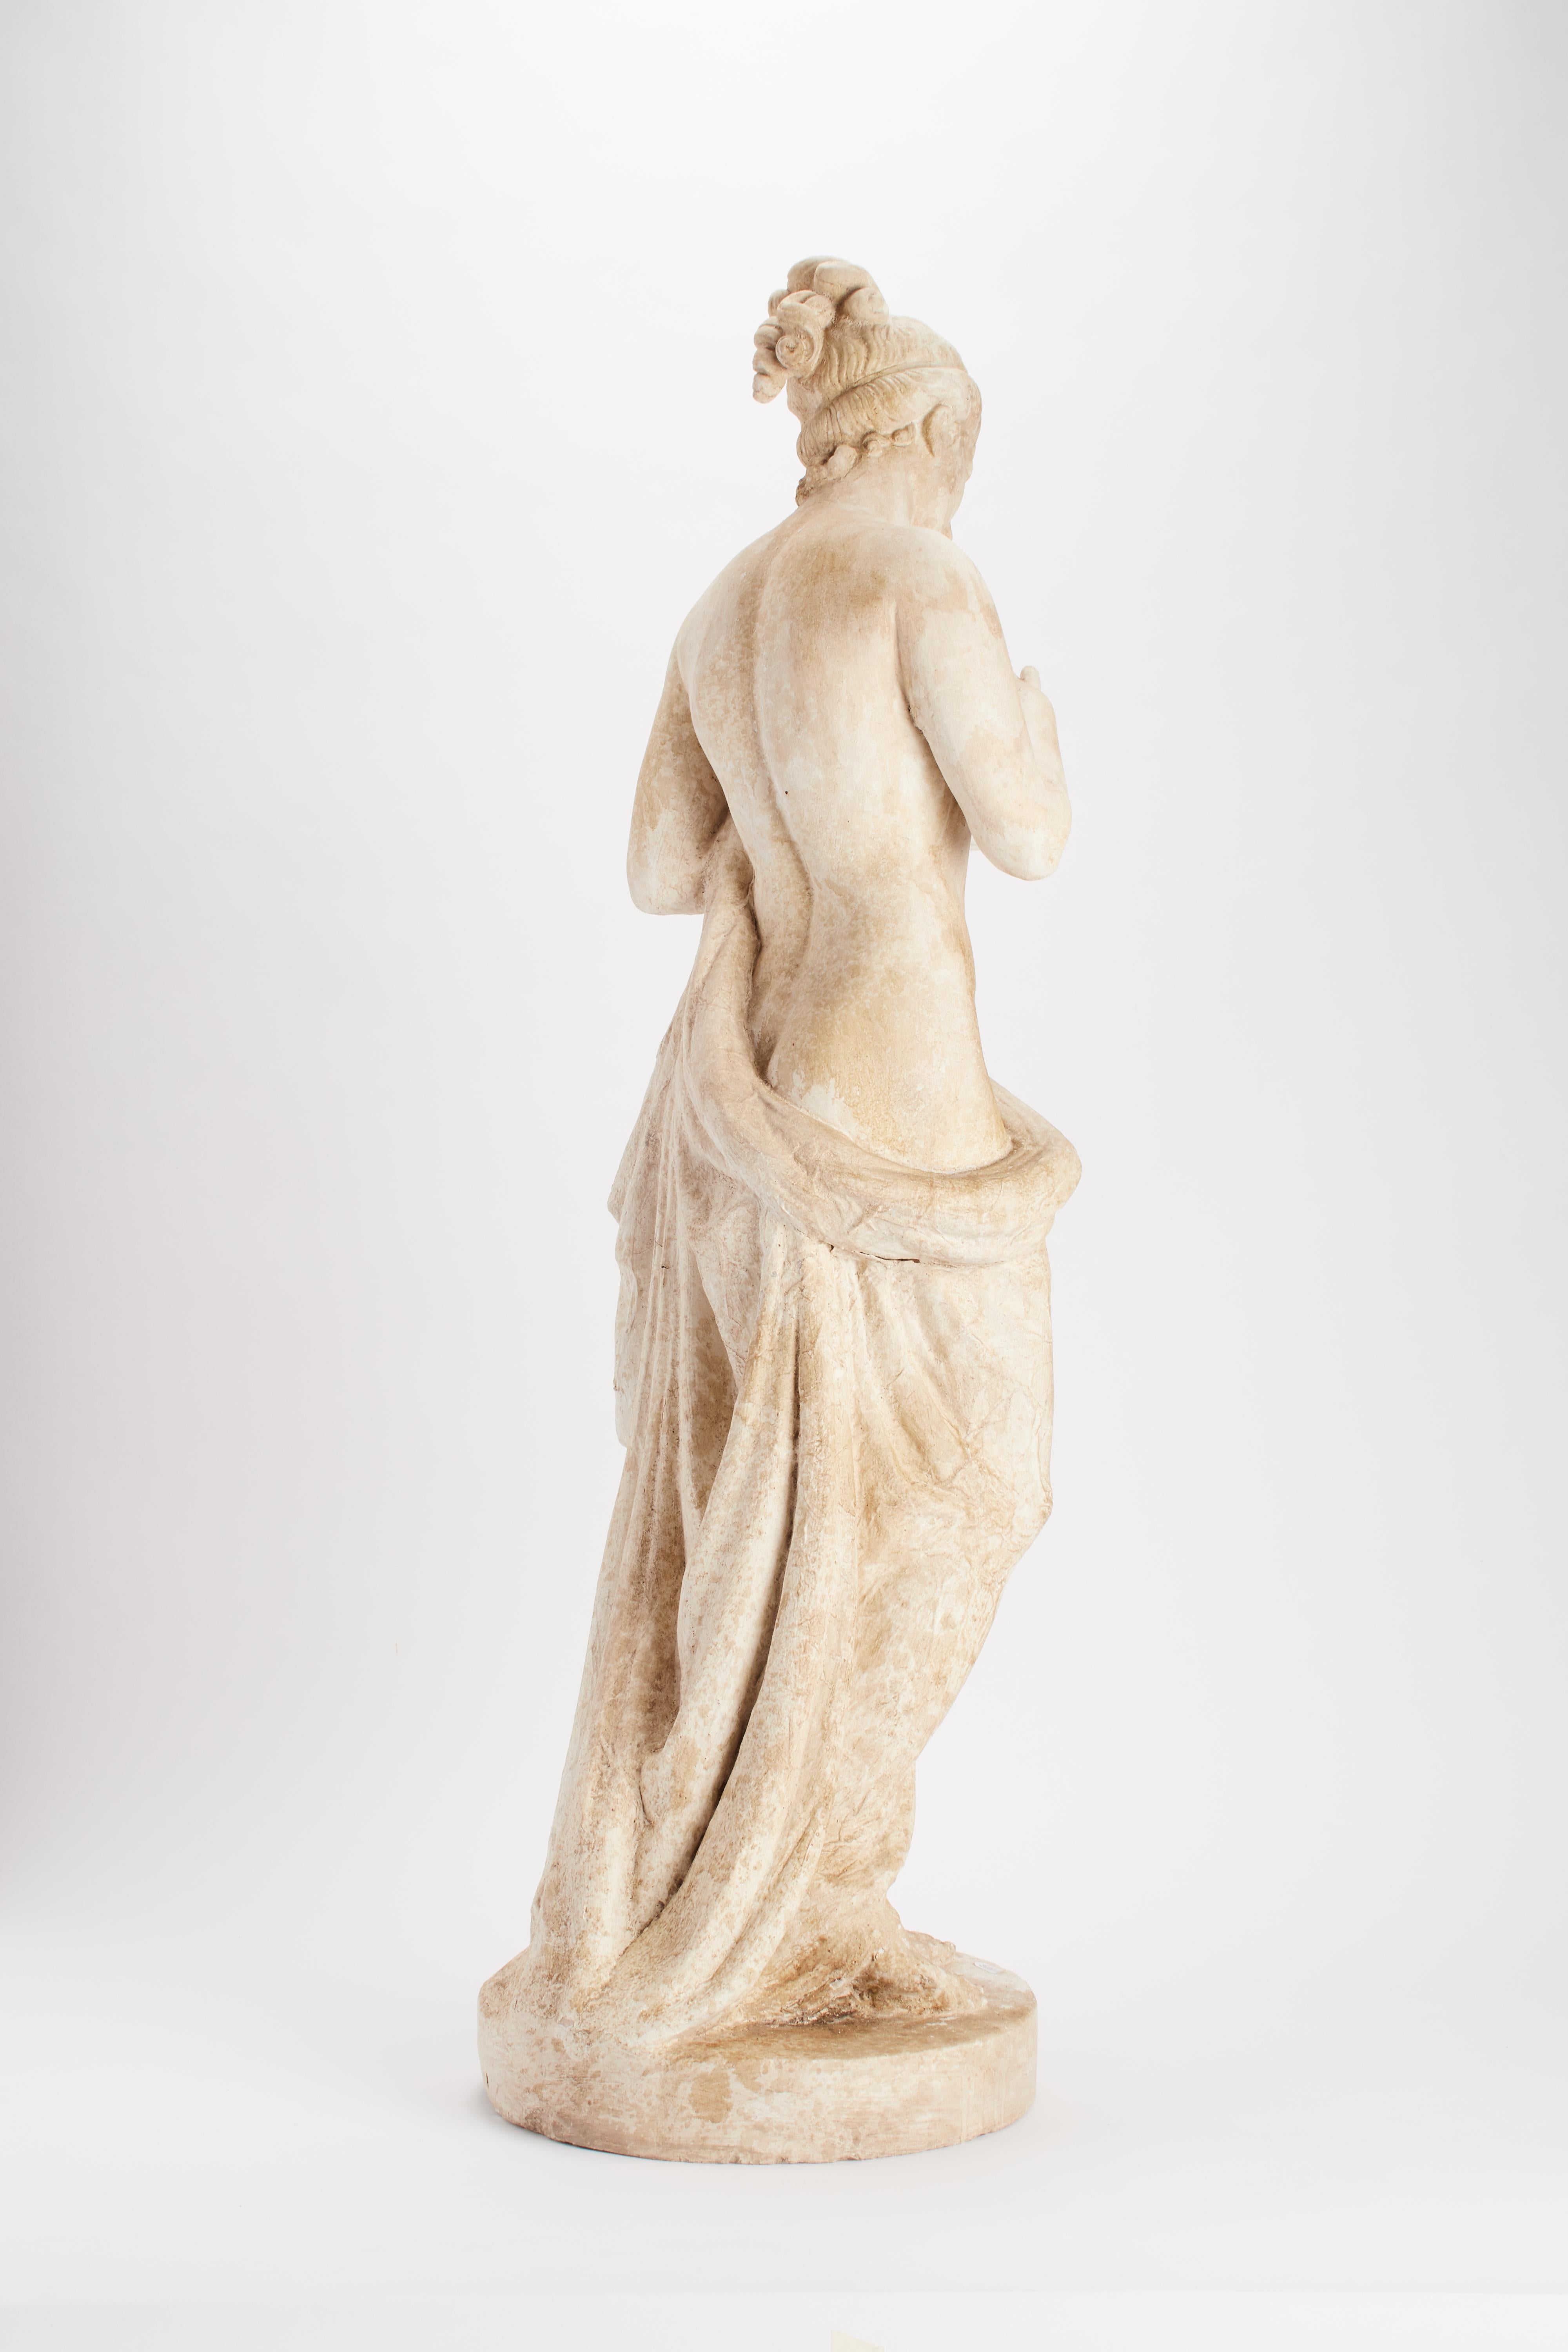 Late 19th Century Academic Cast Depicting a Psyche, Italy, 1890